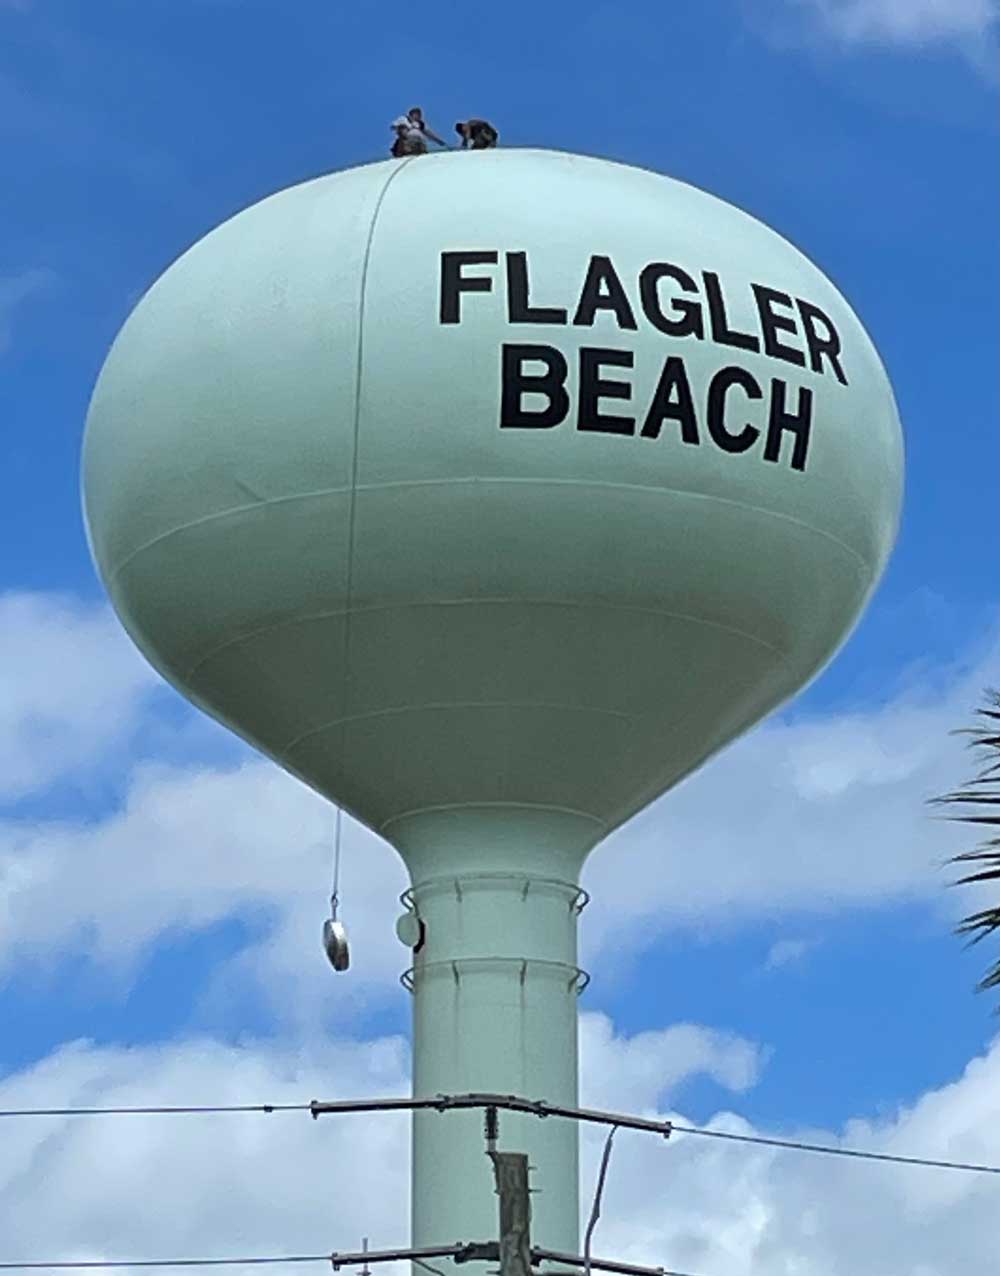 Flagler Beach was in repair mode all the way to its water tower today. (© Rick Belhumeur for FlaglerLive)